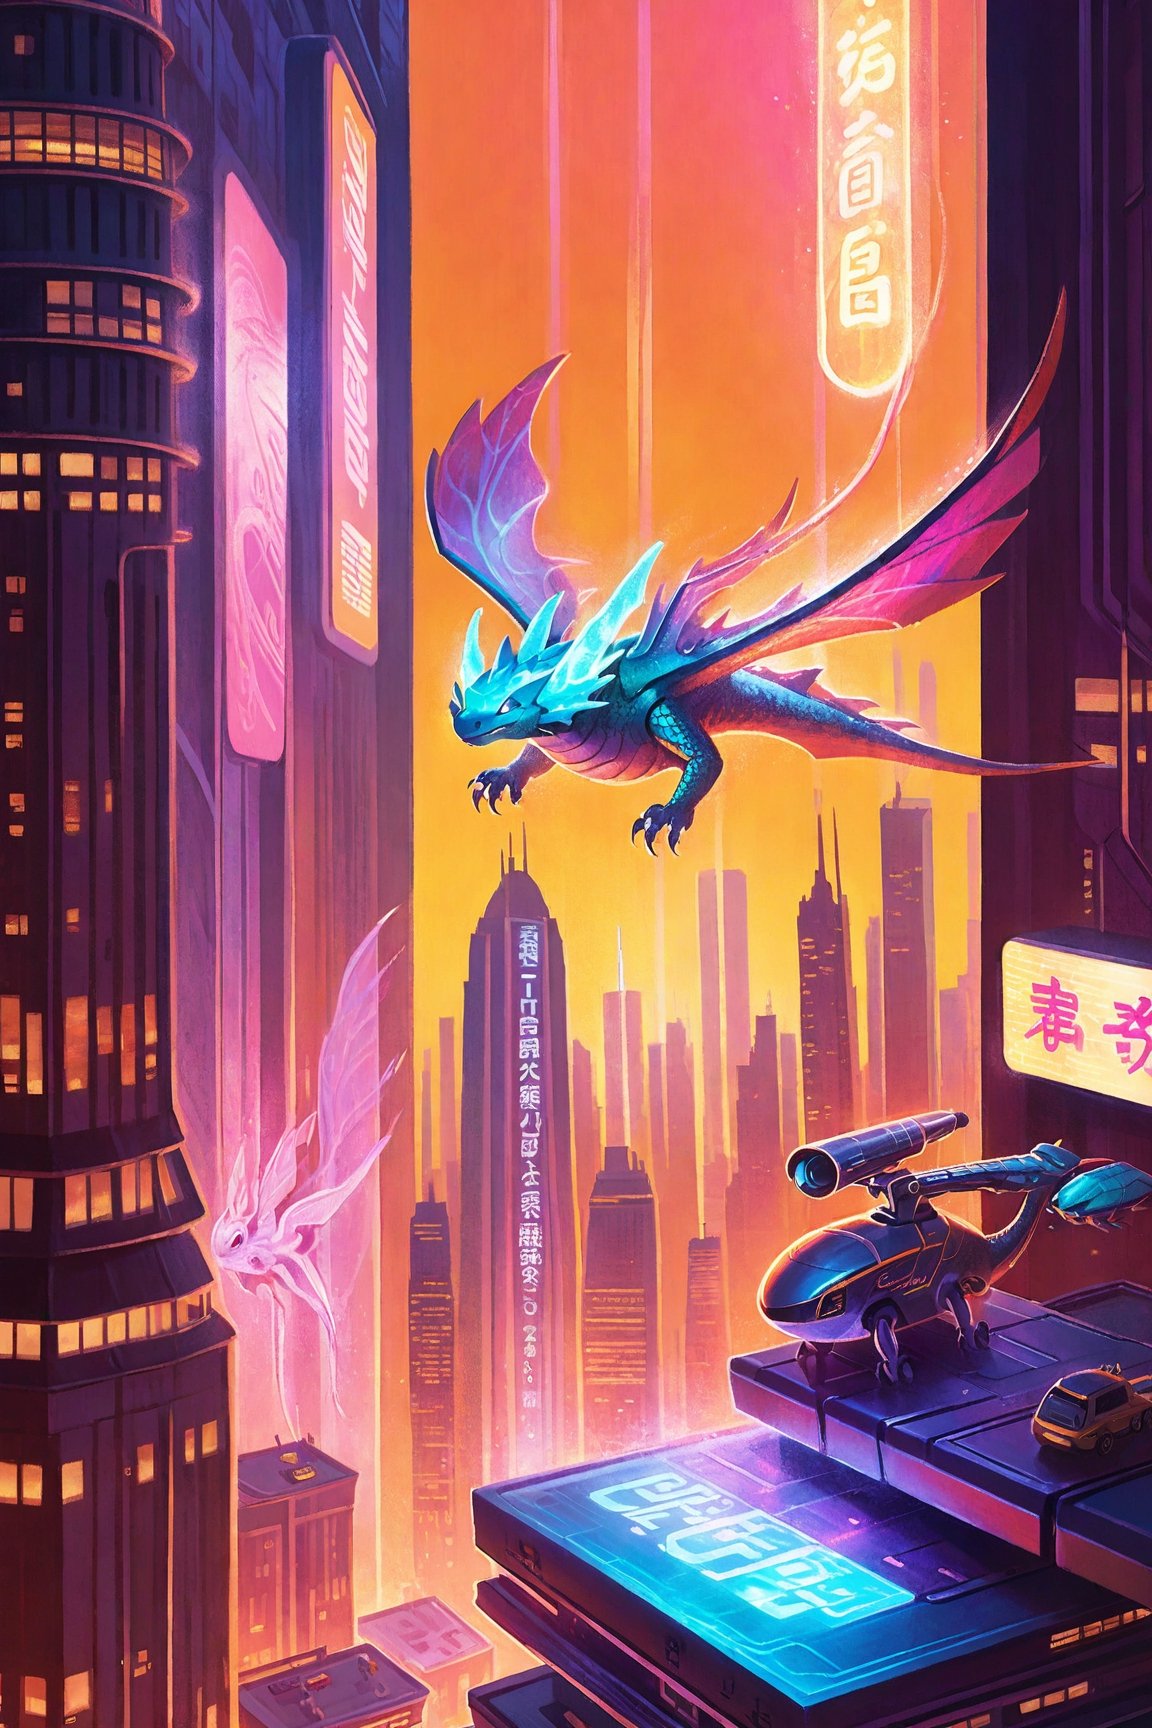 futuristic dragon (cybernetic:1.2) soaring through a (neon-lit cityscape:1.1) with (hovering vehicles:1.2) in the sky. The dragon's body is (metallic:1.2) with (glowing circuit patterns:1.1), and its wings are (mechanical:1.2) with (laser-like propulsion:1.1). The city below is a (high-tech metropolis:1.2) with (skyscrapers:1.1) reaching into the sky. The dragon has (integrated weaponry:1.2) and (advanced targeting systems:1.1). The sky is filled with (holographic advertisements:1.2) and (floating billboards:1.1). The overall style is (cyberpunk:1.2) with a focus on (technological marvels:1.1).
负向提示